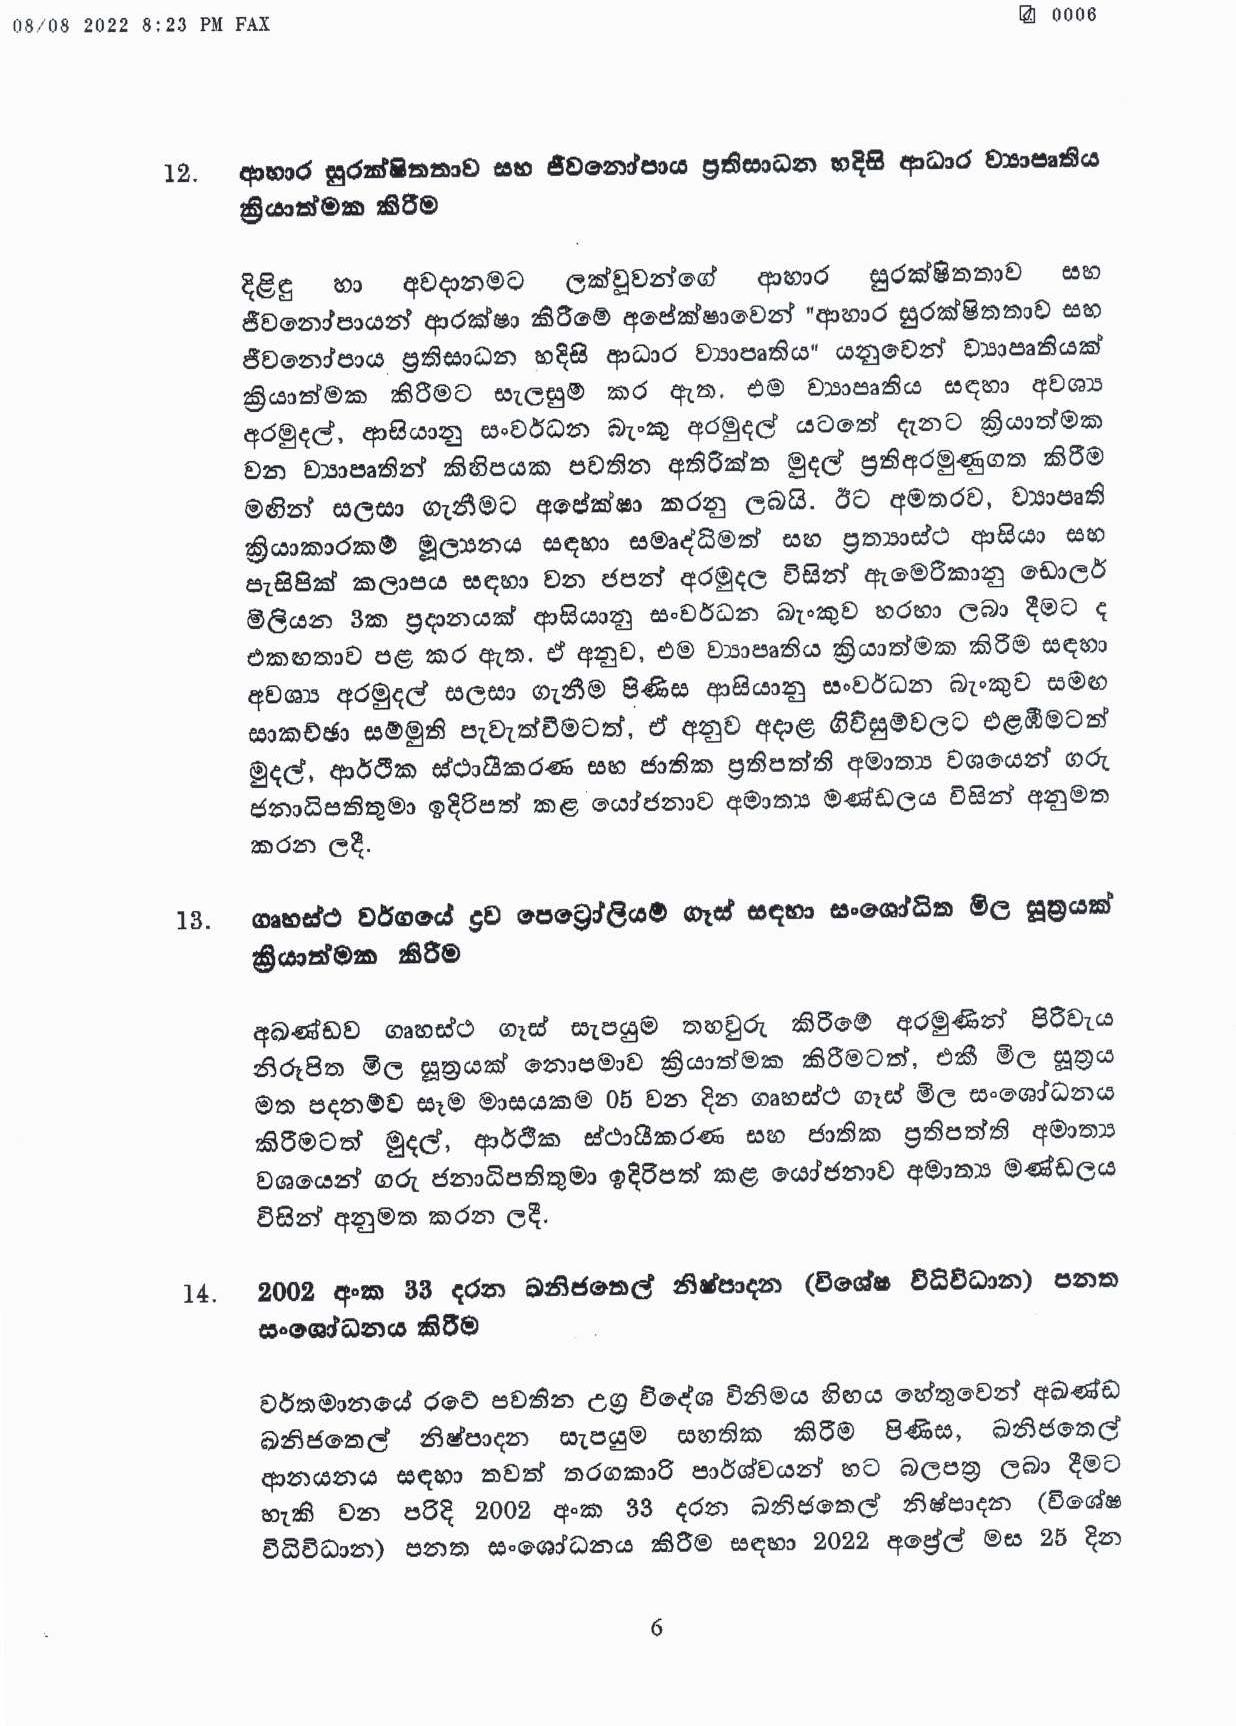 Cabinet Decisions on 08.08.2022 page 006